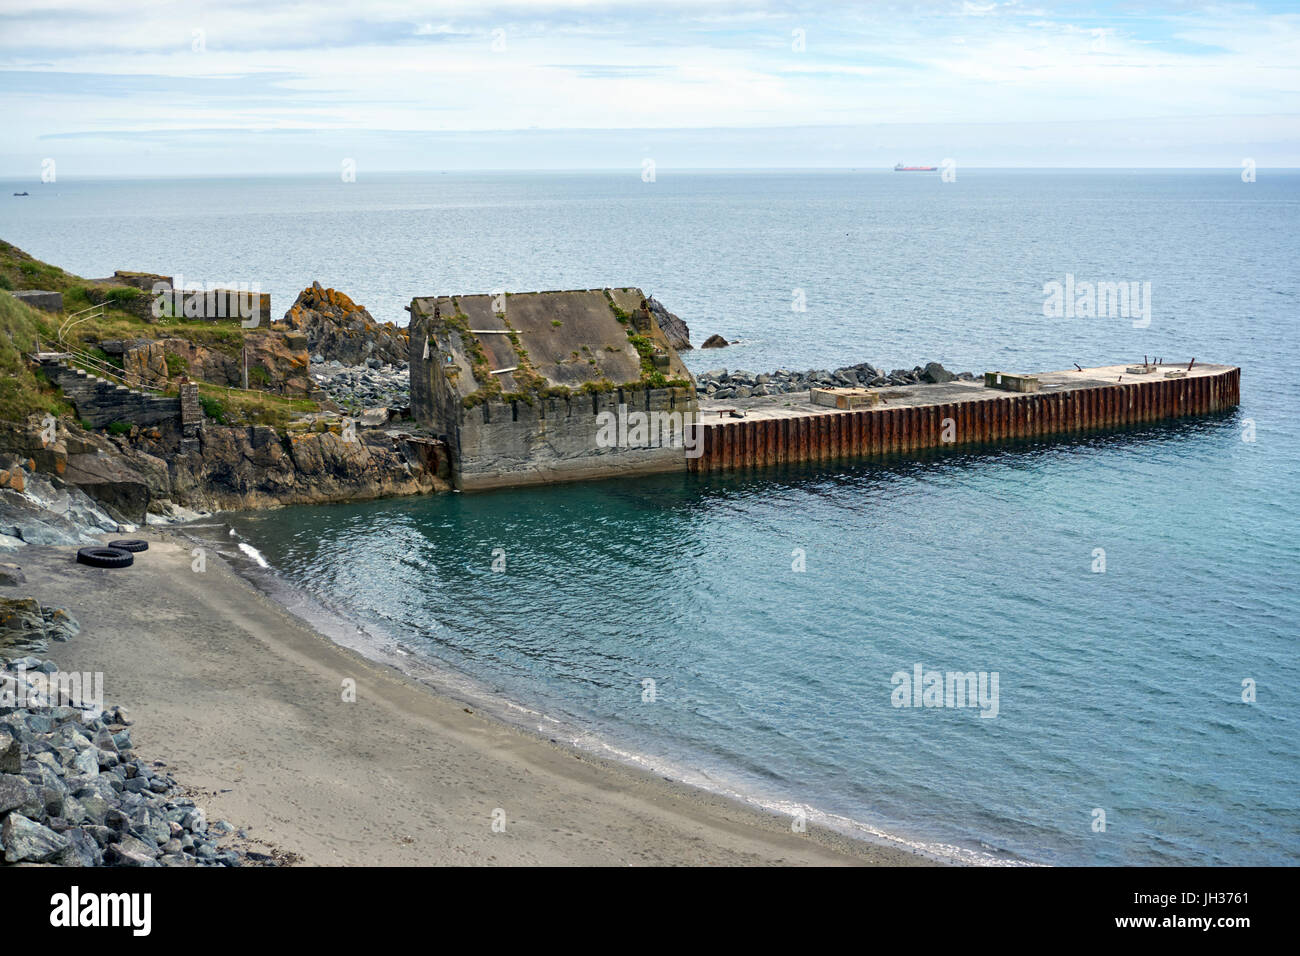 Abandoned jetty at Dean Quarry, near Dean Point/St Keverne, Lizard, Cornwall, UK Stock Photo